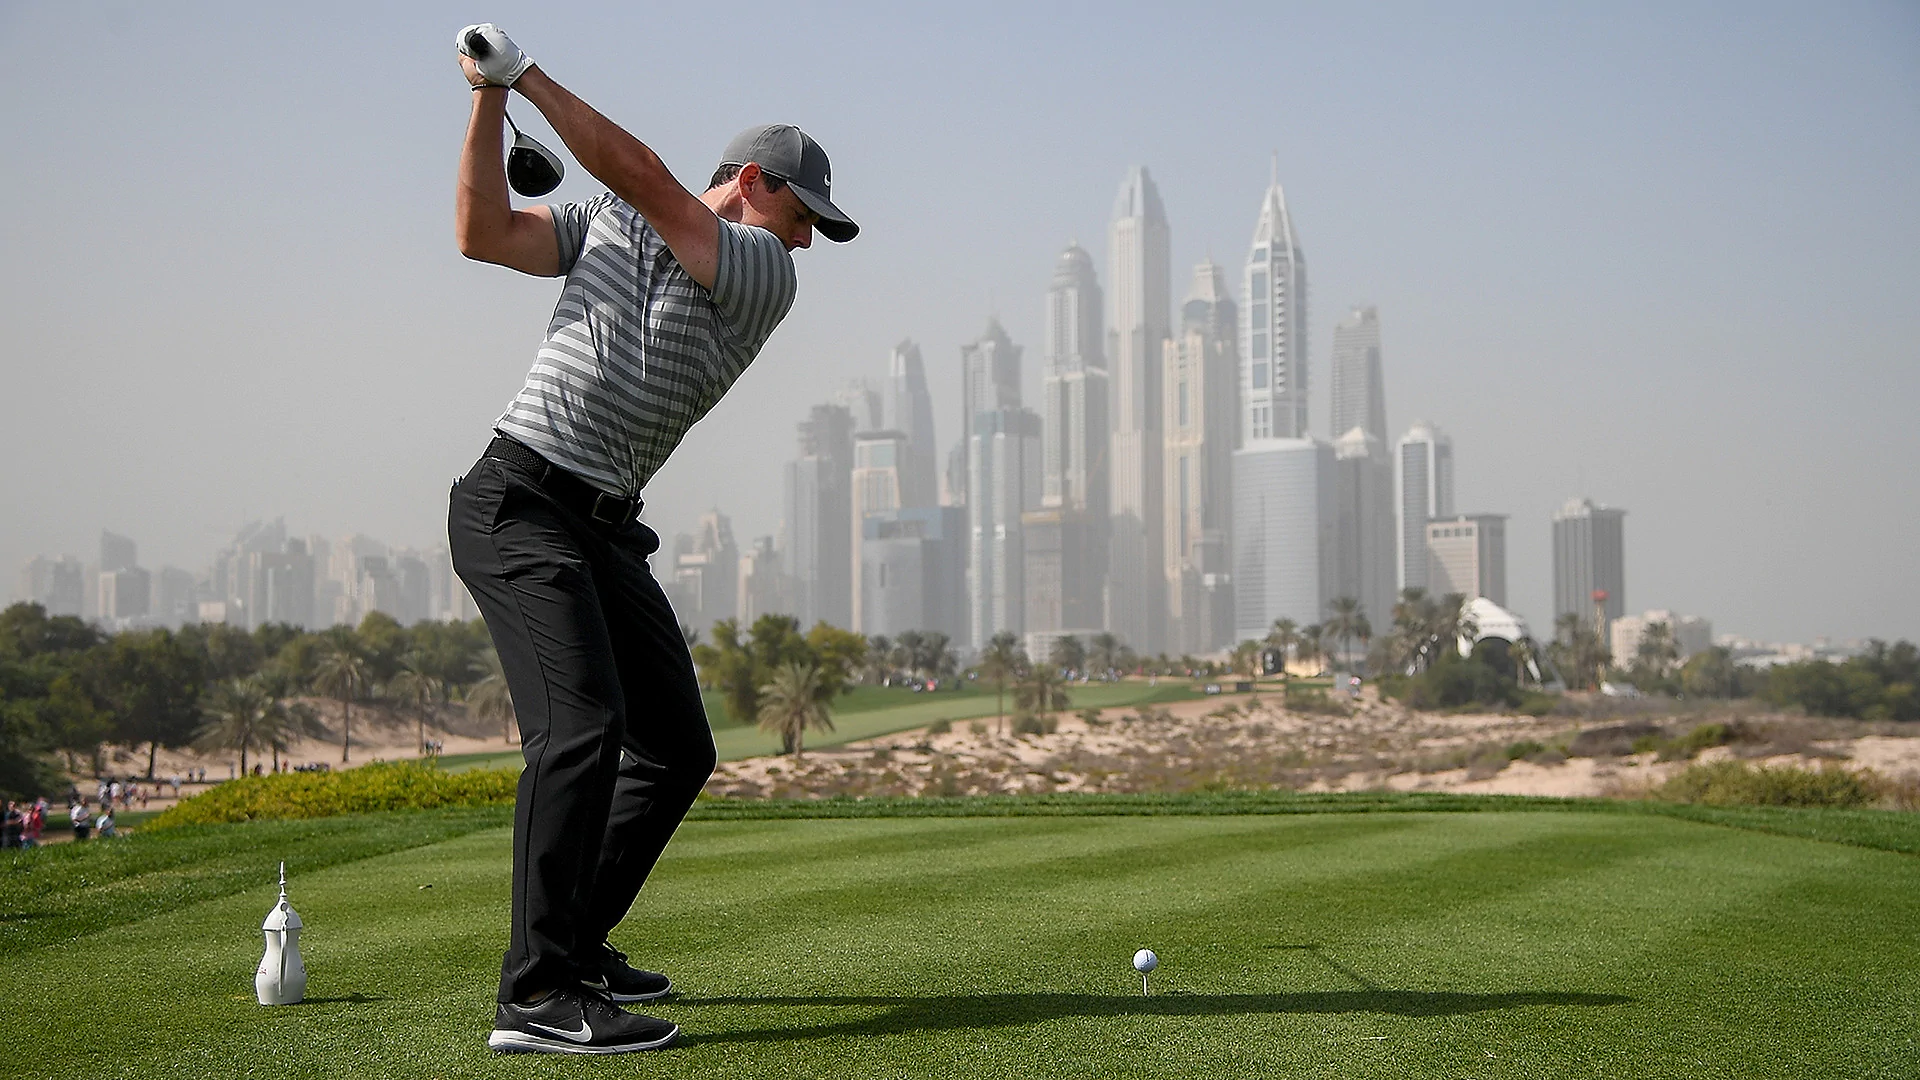 McIlroy 'ahead of schedule' after opening 65 in Dubai